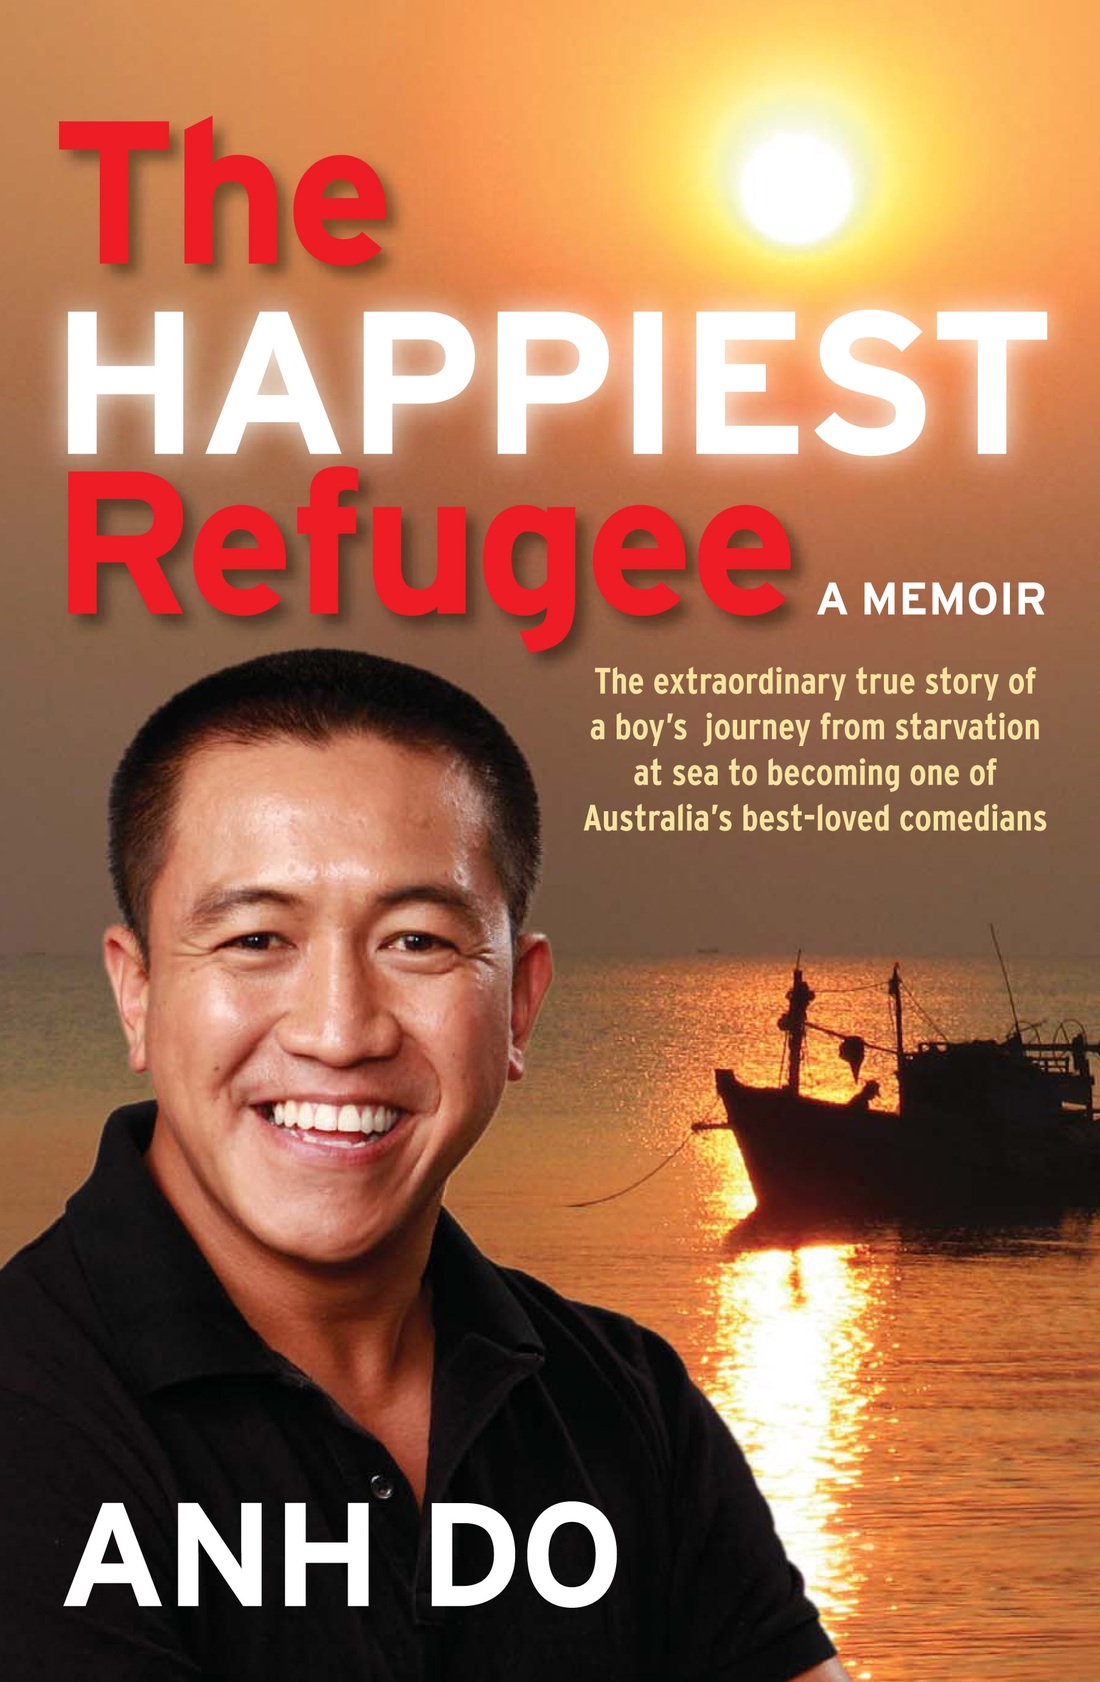 anh do the happiest refugee essay